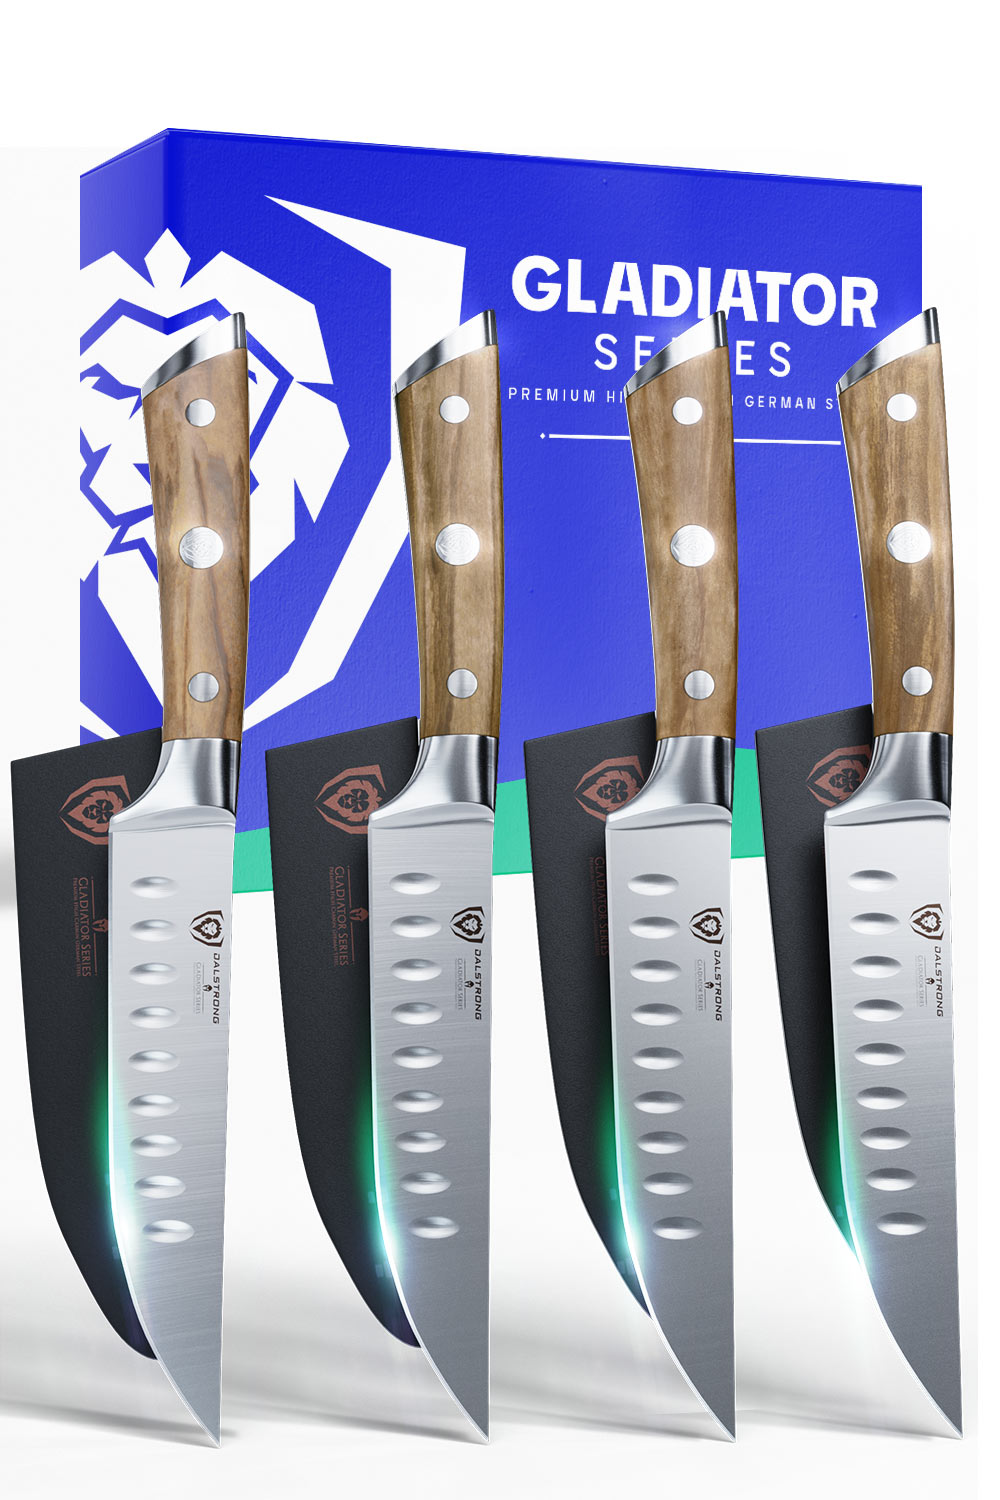 Dalstrong Steak Knives - Set of 4 - Serrated Blade - Gladiator Series Elite  - Forged German High-Carbon Steel - Table Dinner Kitchen Knives - Sheaths